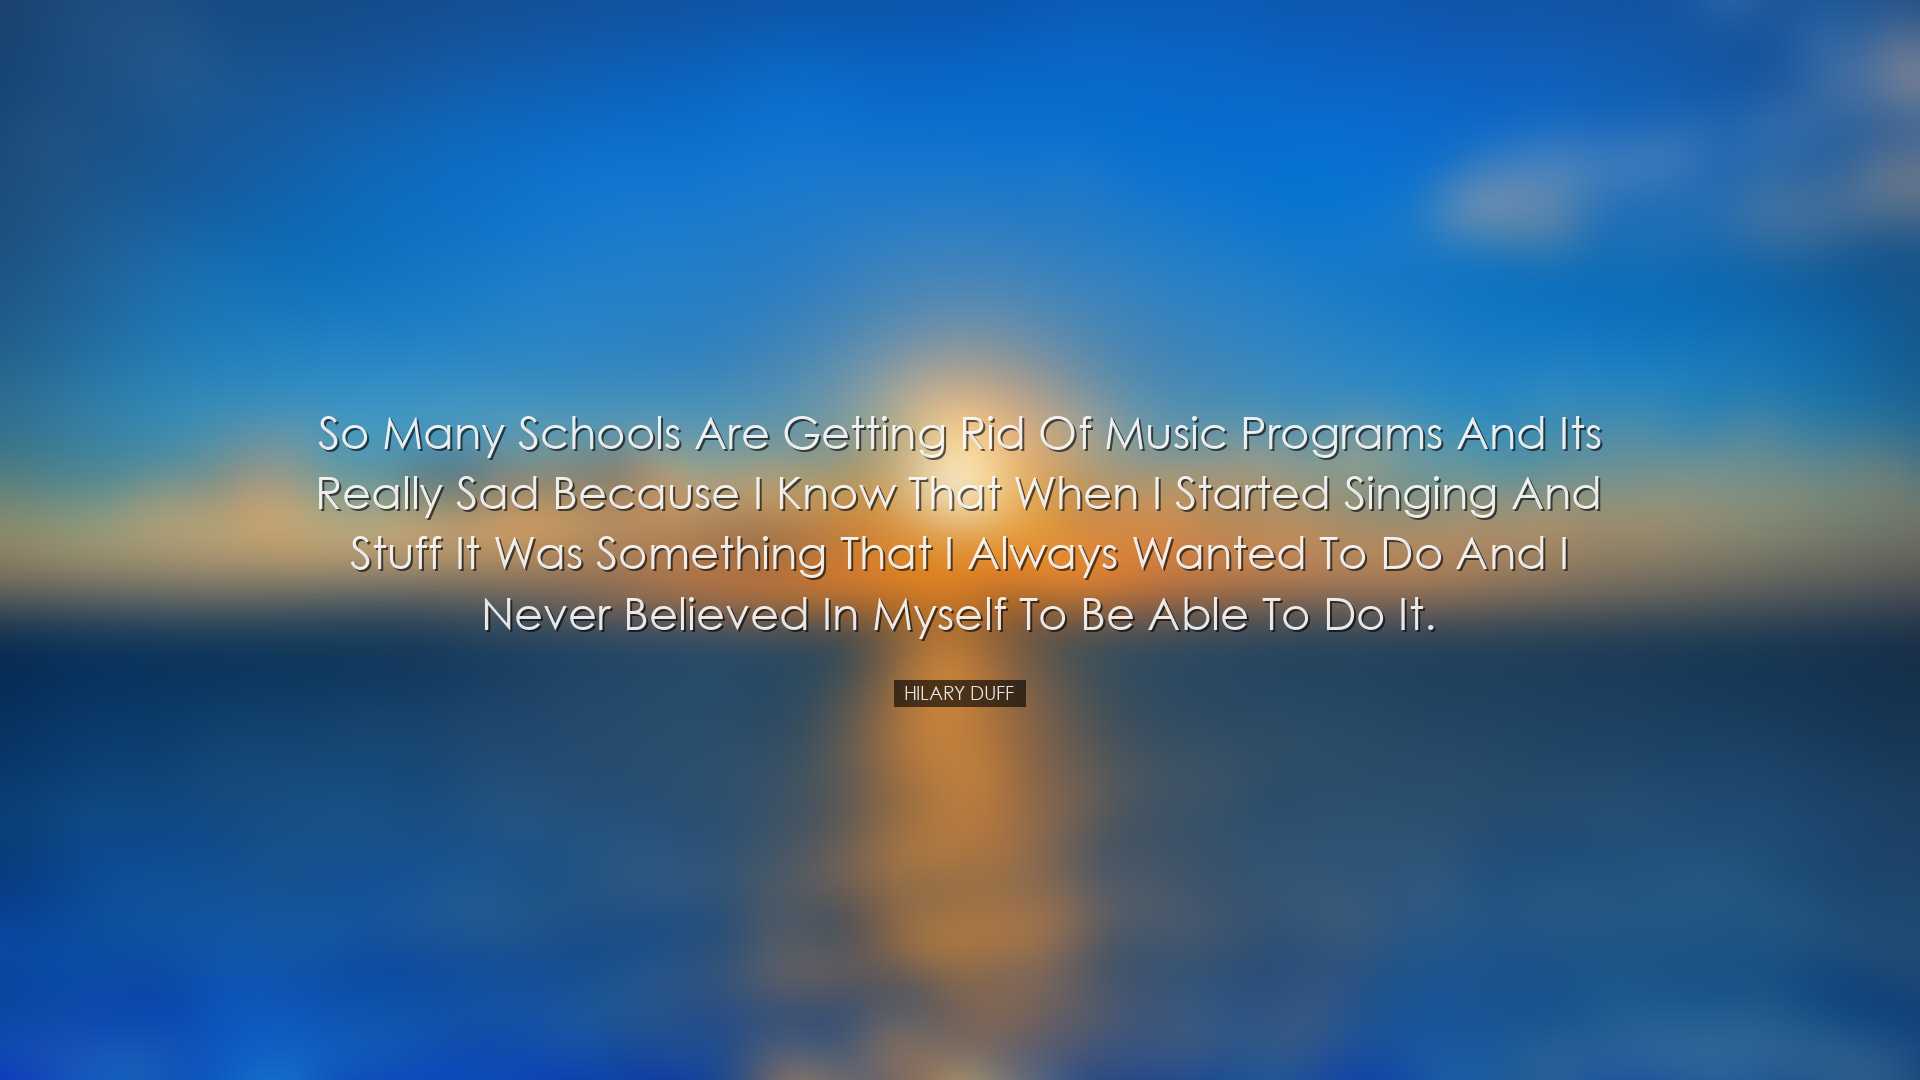 So many schools are getting rid of music programs and its really s